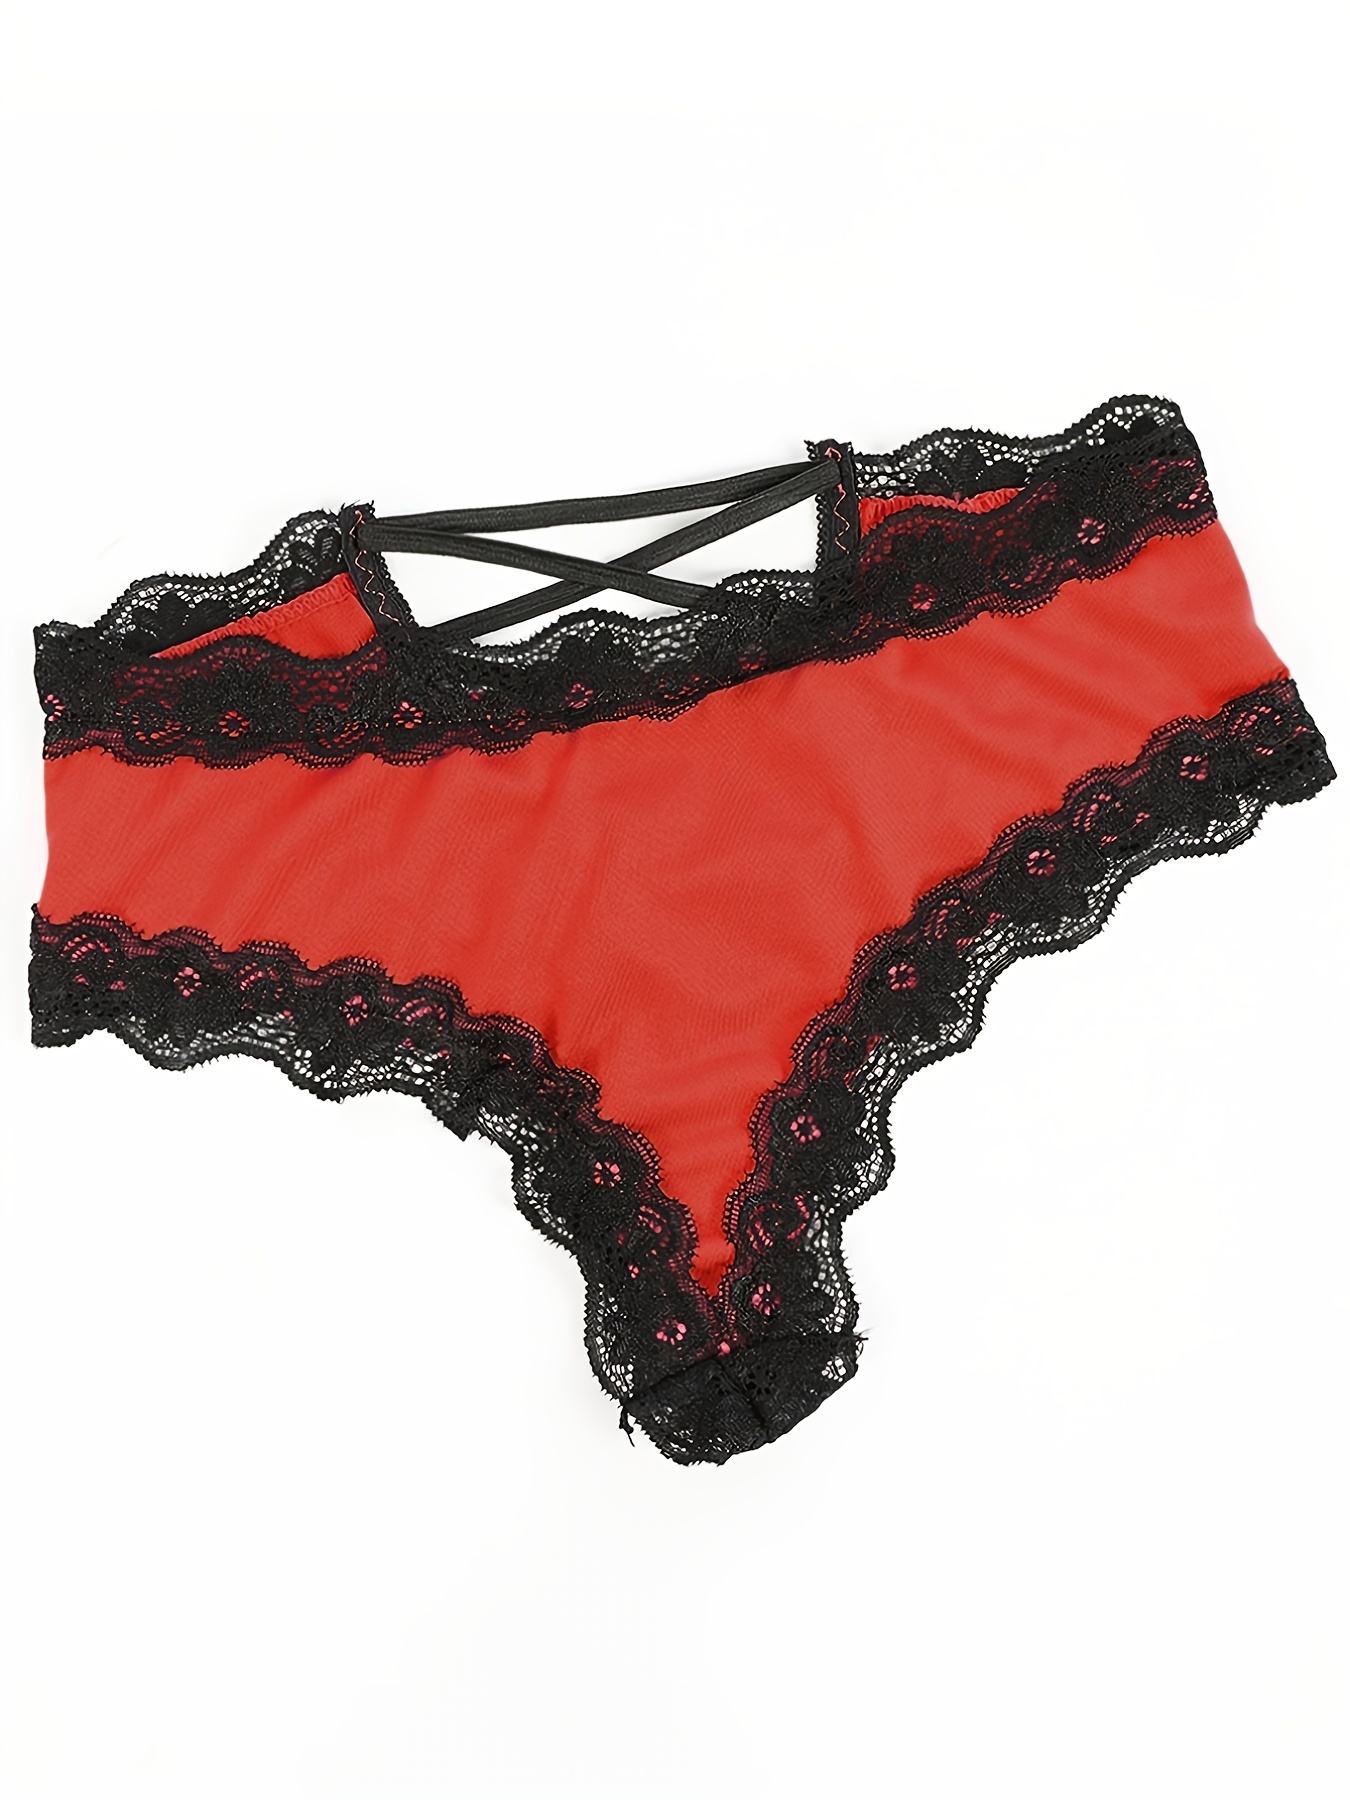 Buy Victoria's Secret Floral Lace Hipster Thong Knickers from the